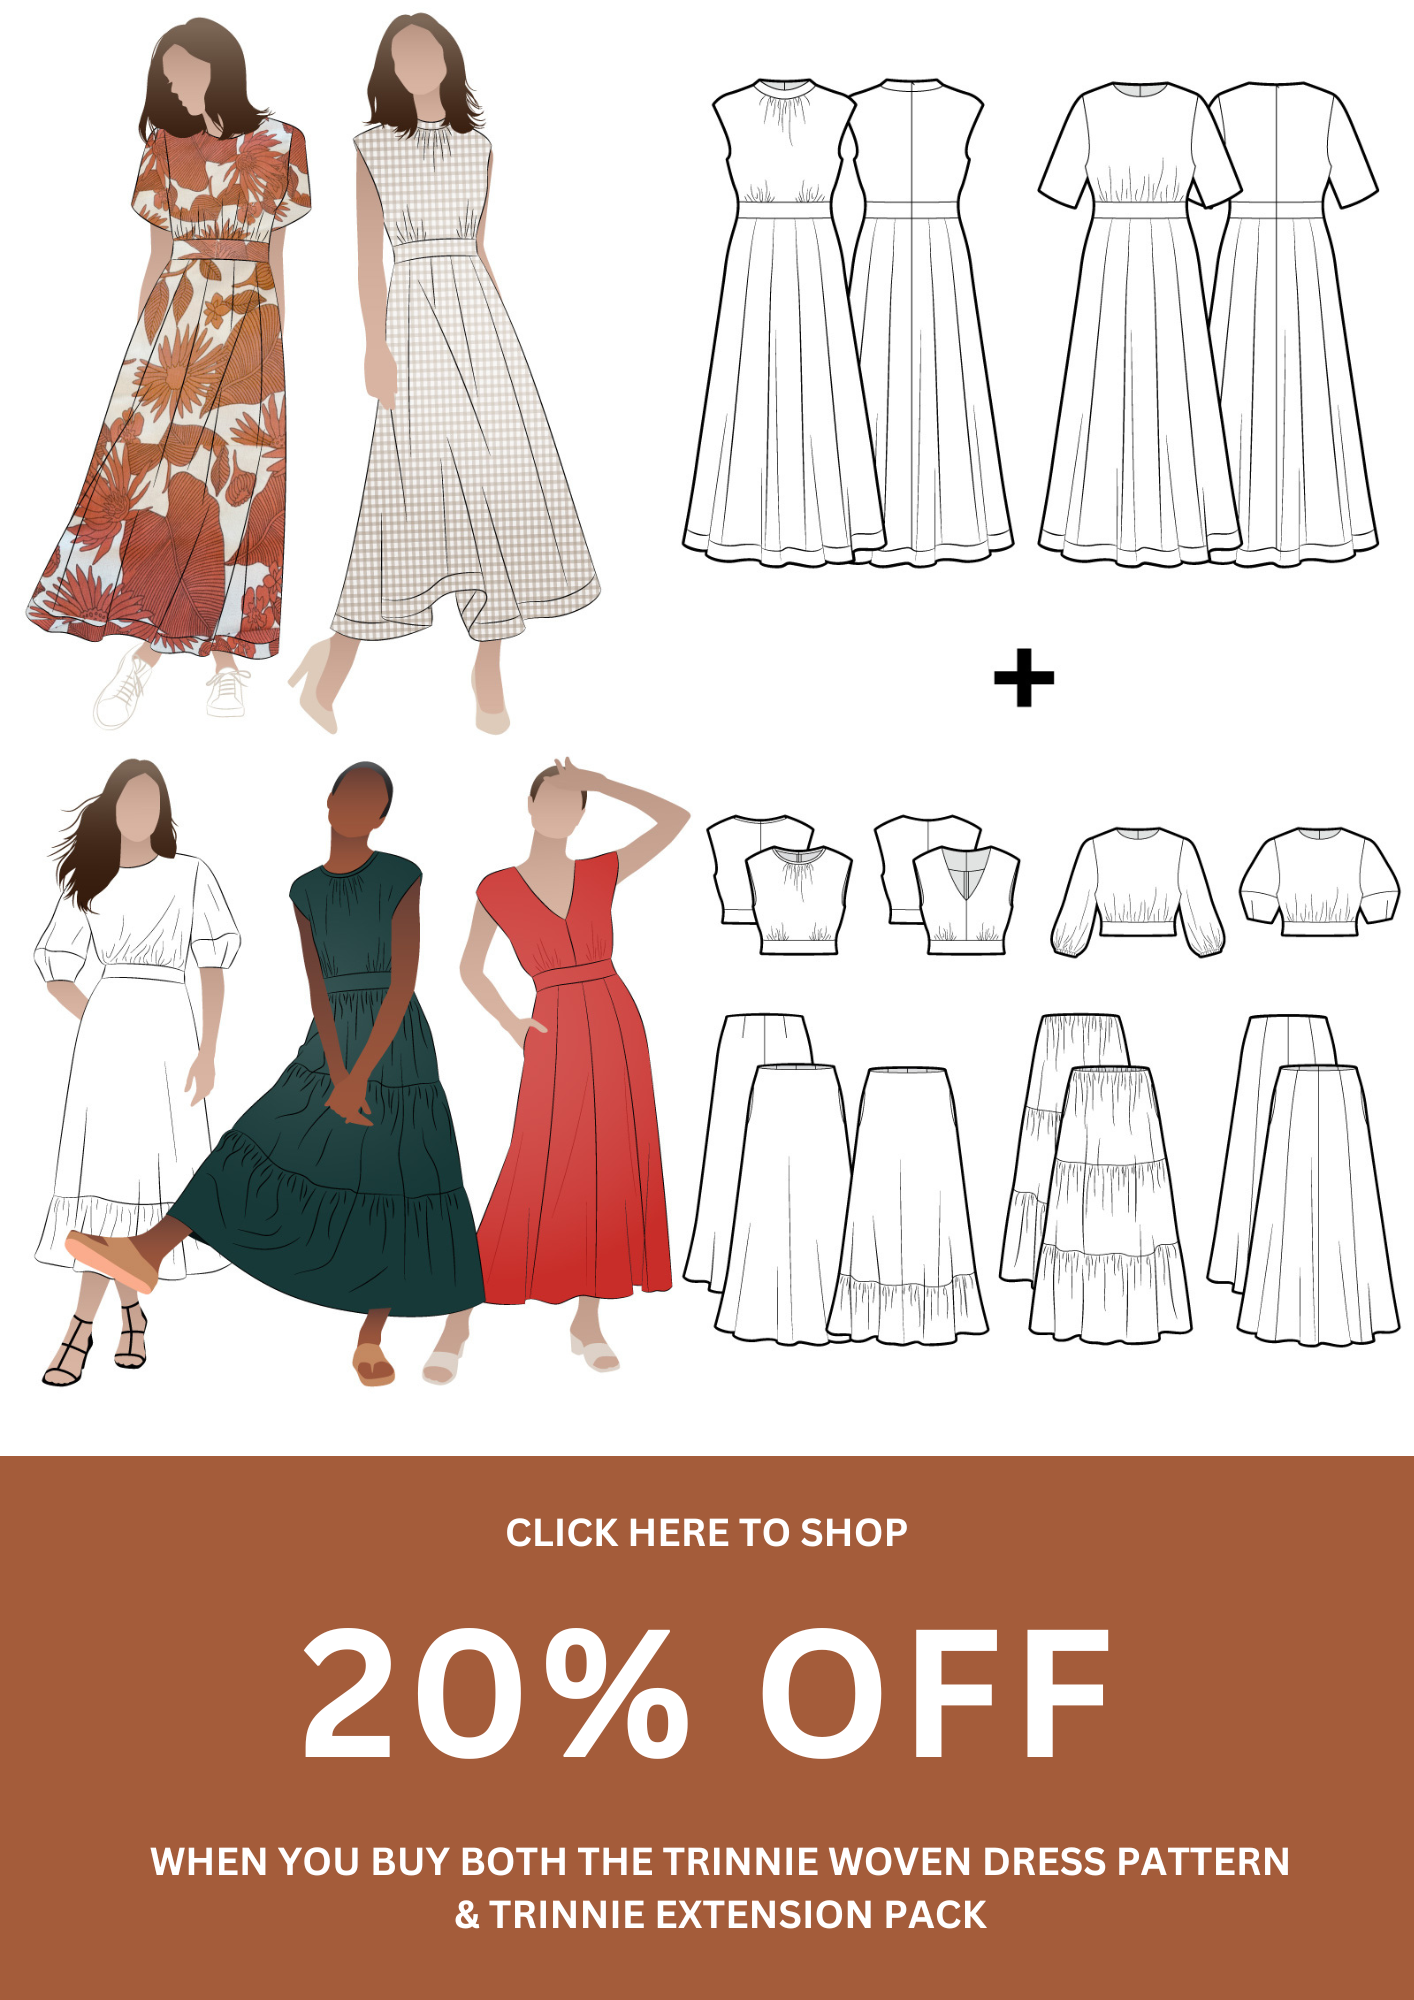 Shop 20% off the Trinnie Woven Dress + Trinnie Extension Pack pattern bundle